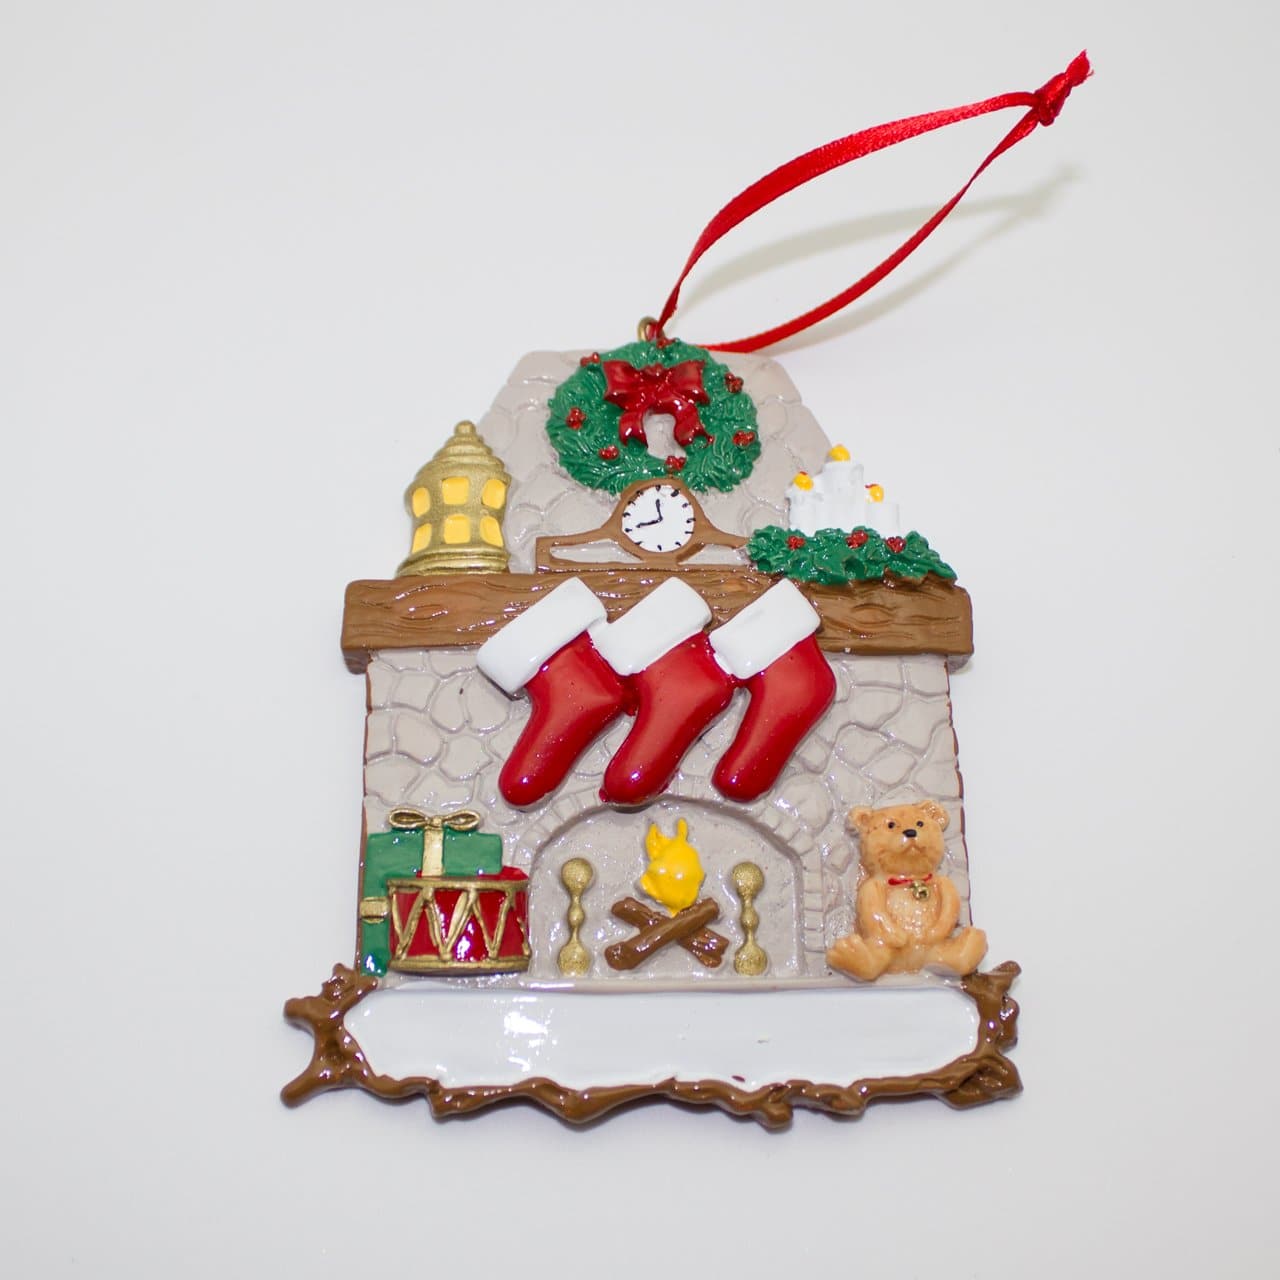 Fireplace Stockings - Christmas Ornament (Suitable for Personalization)